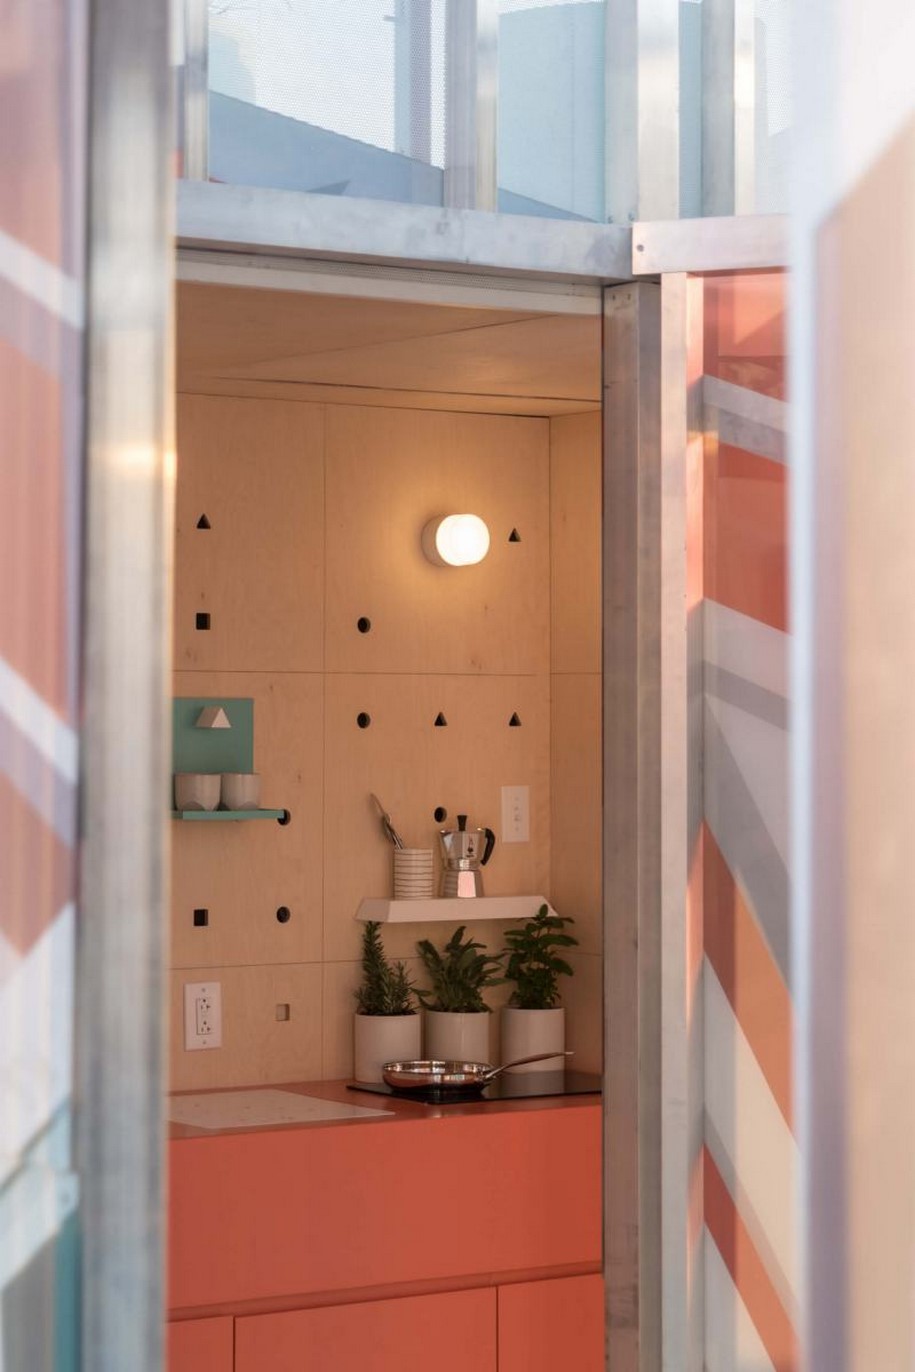 Archisearch THE GLOBAL VILLAGE: the MINI LIVING urban cabin tour